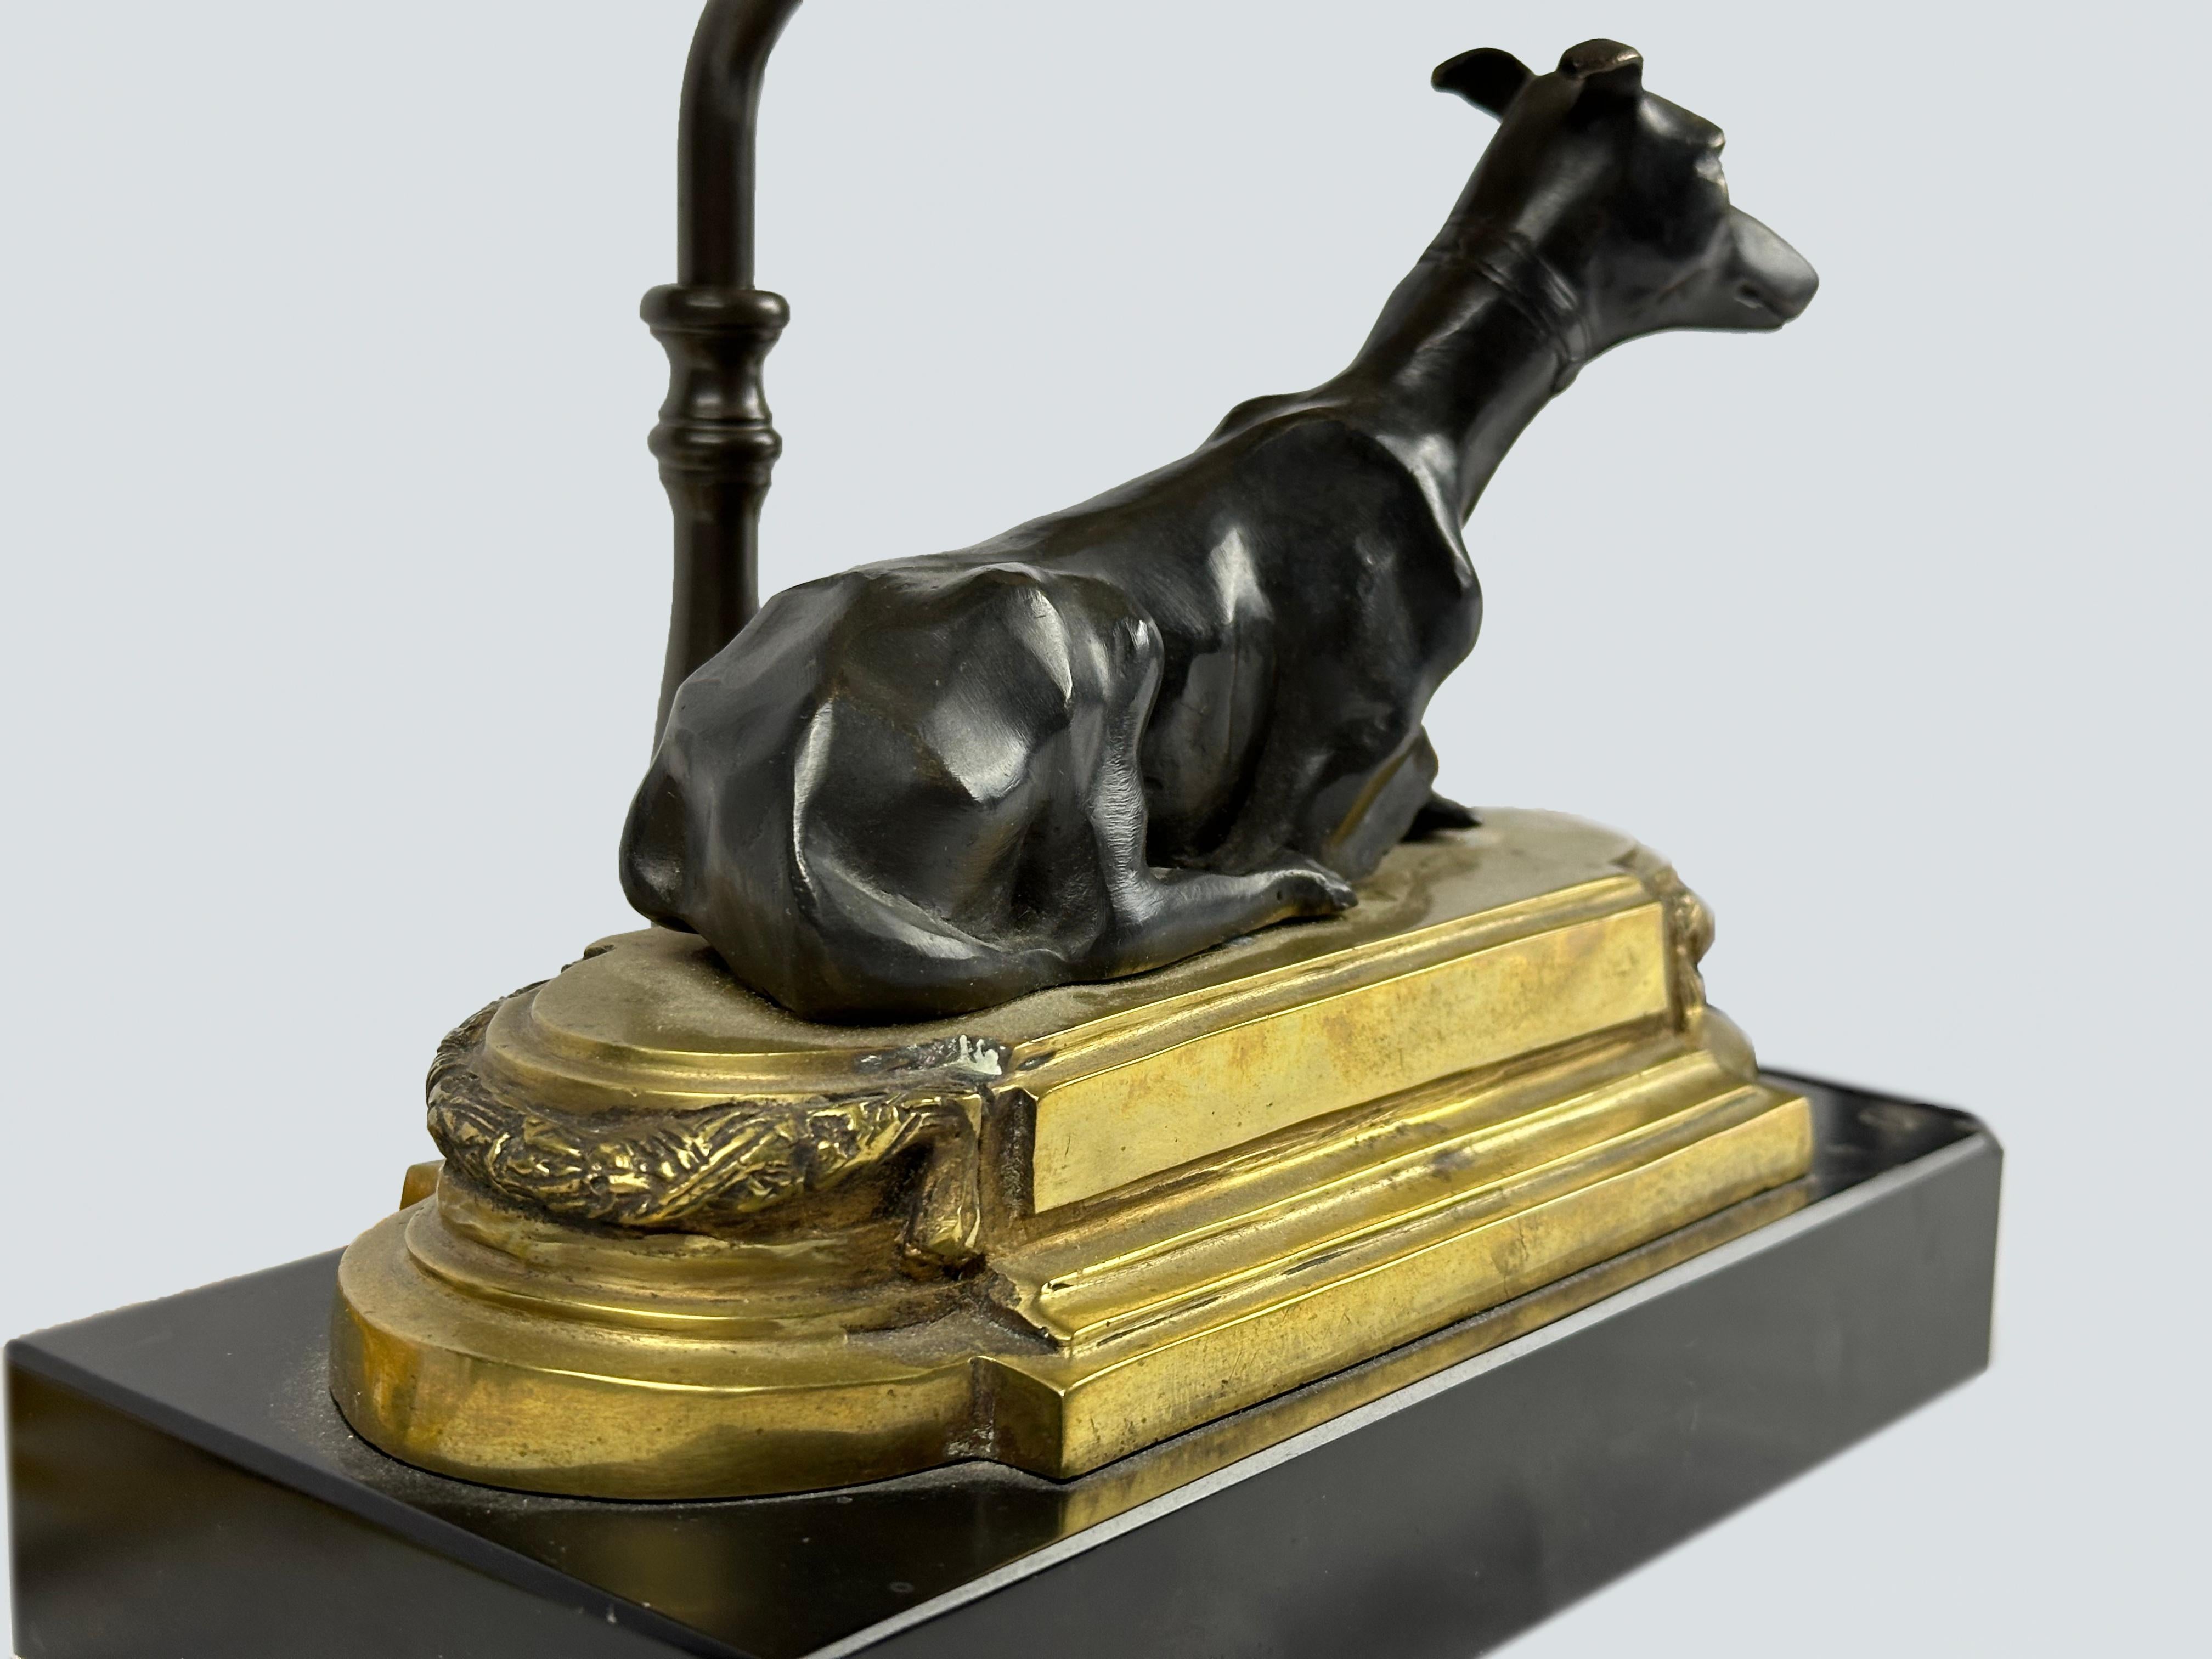 Chelsea House
Whippet Bookcase Lamp (Pair)

Bronze, brass, granite
17 x 9 x 7 inches each



